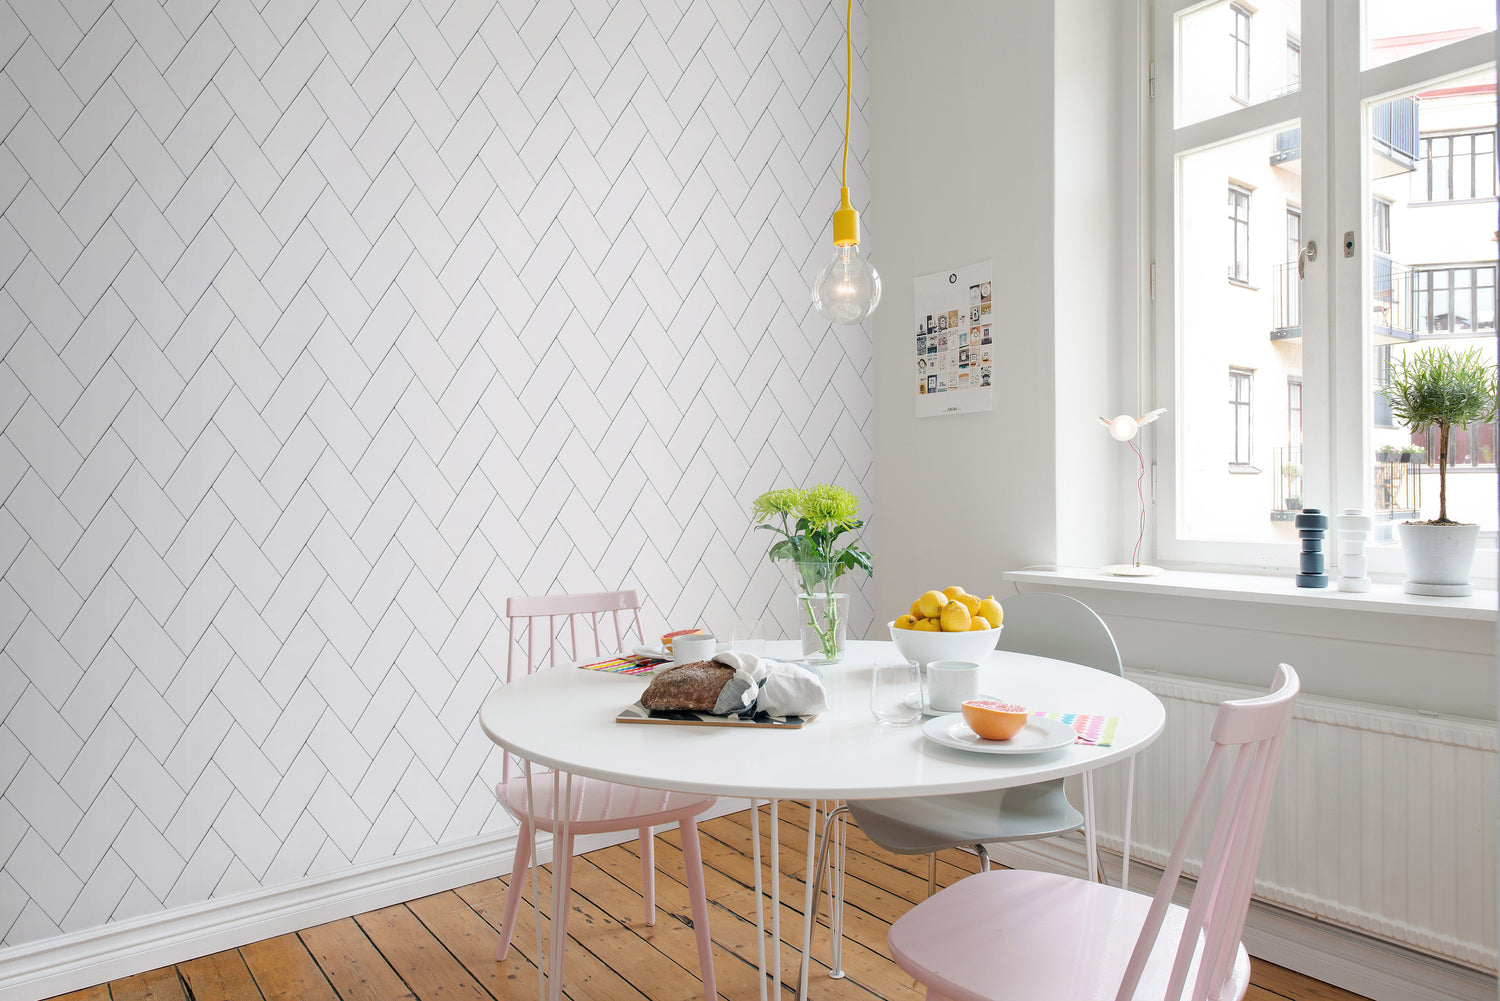 Fishbone Lines, Pattern Wallpaper featured on a wall of a dining area with round white dining table and pink chairs